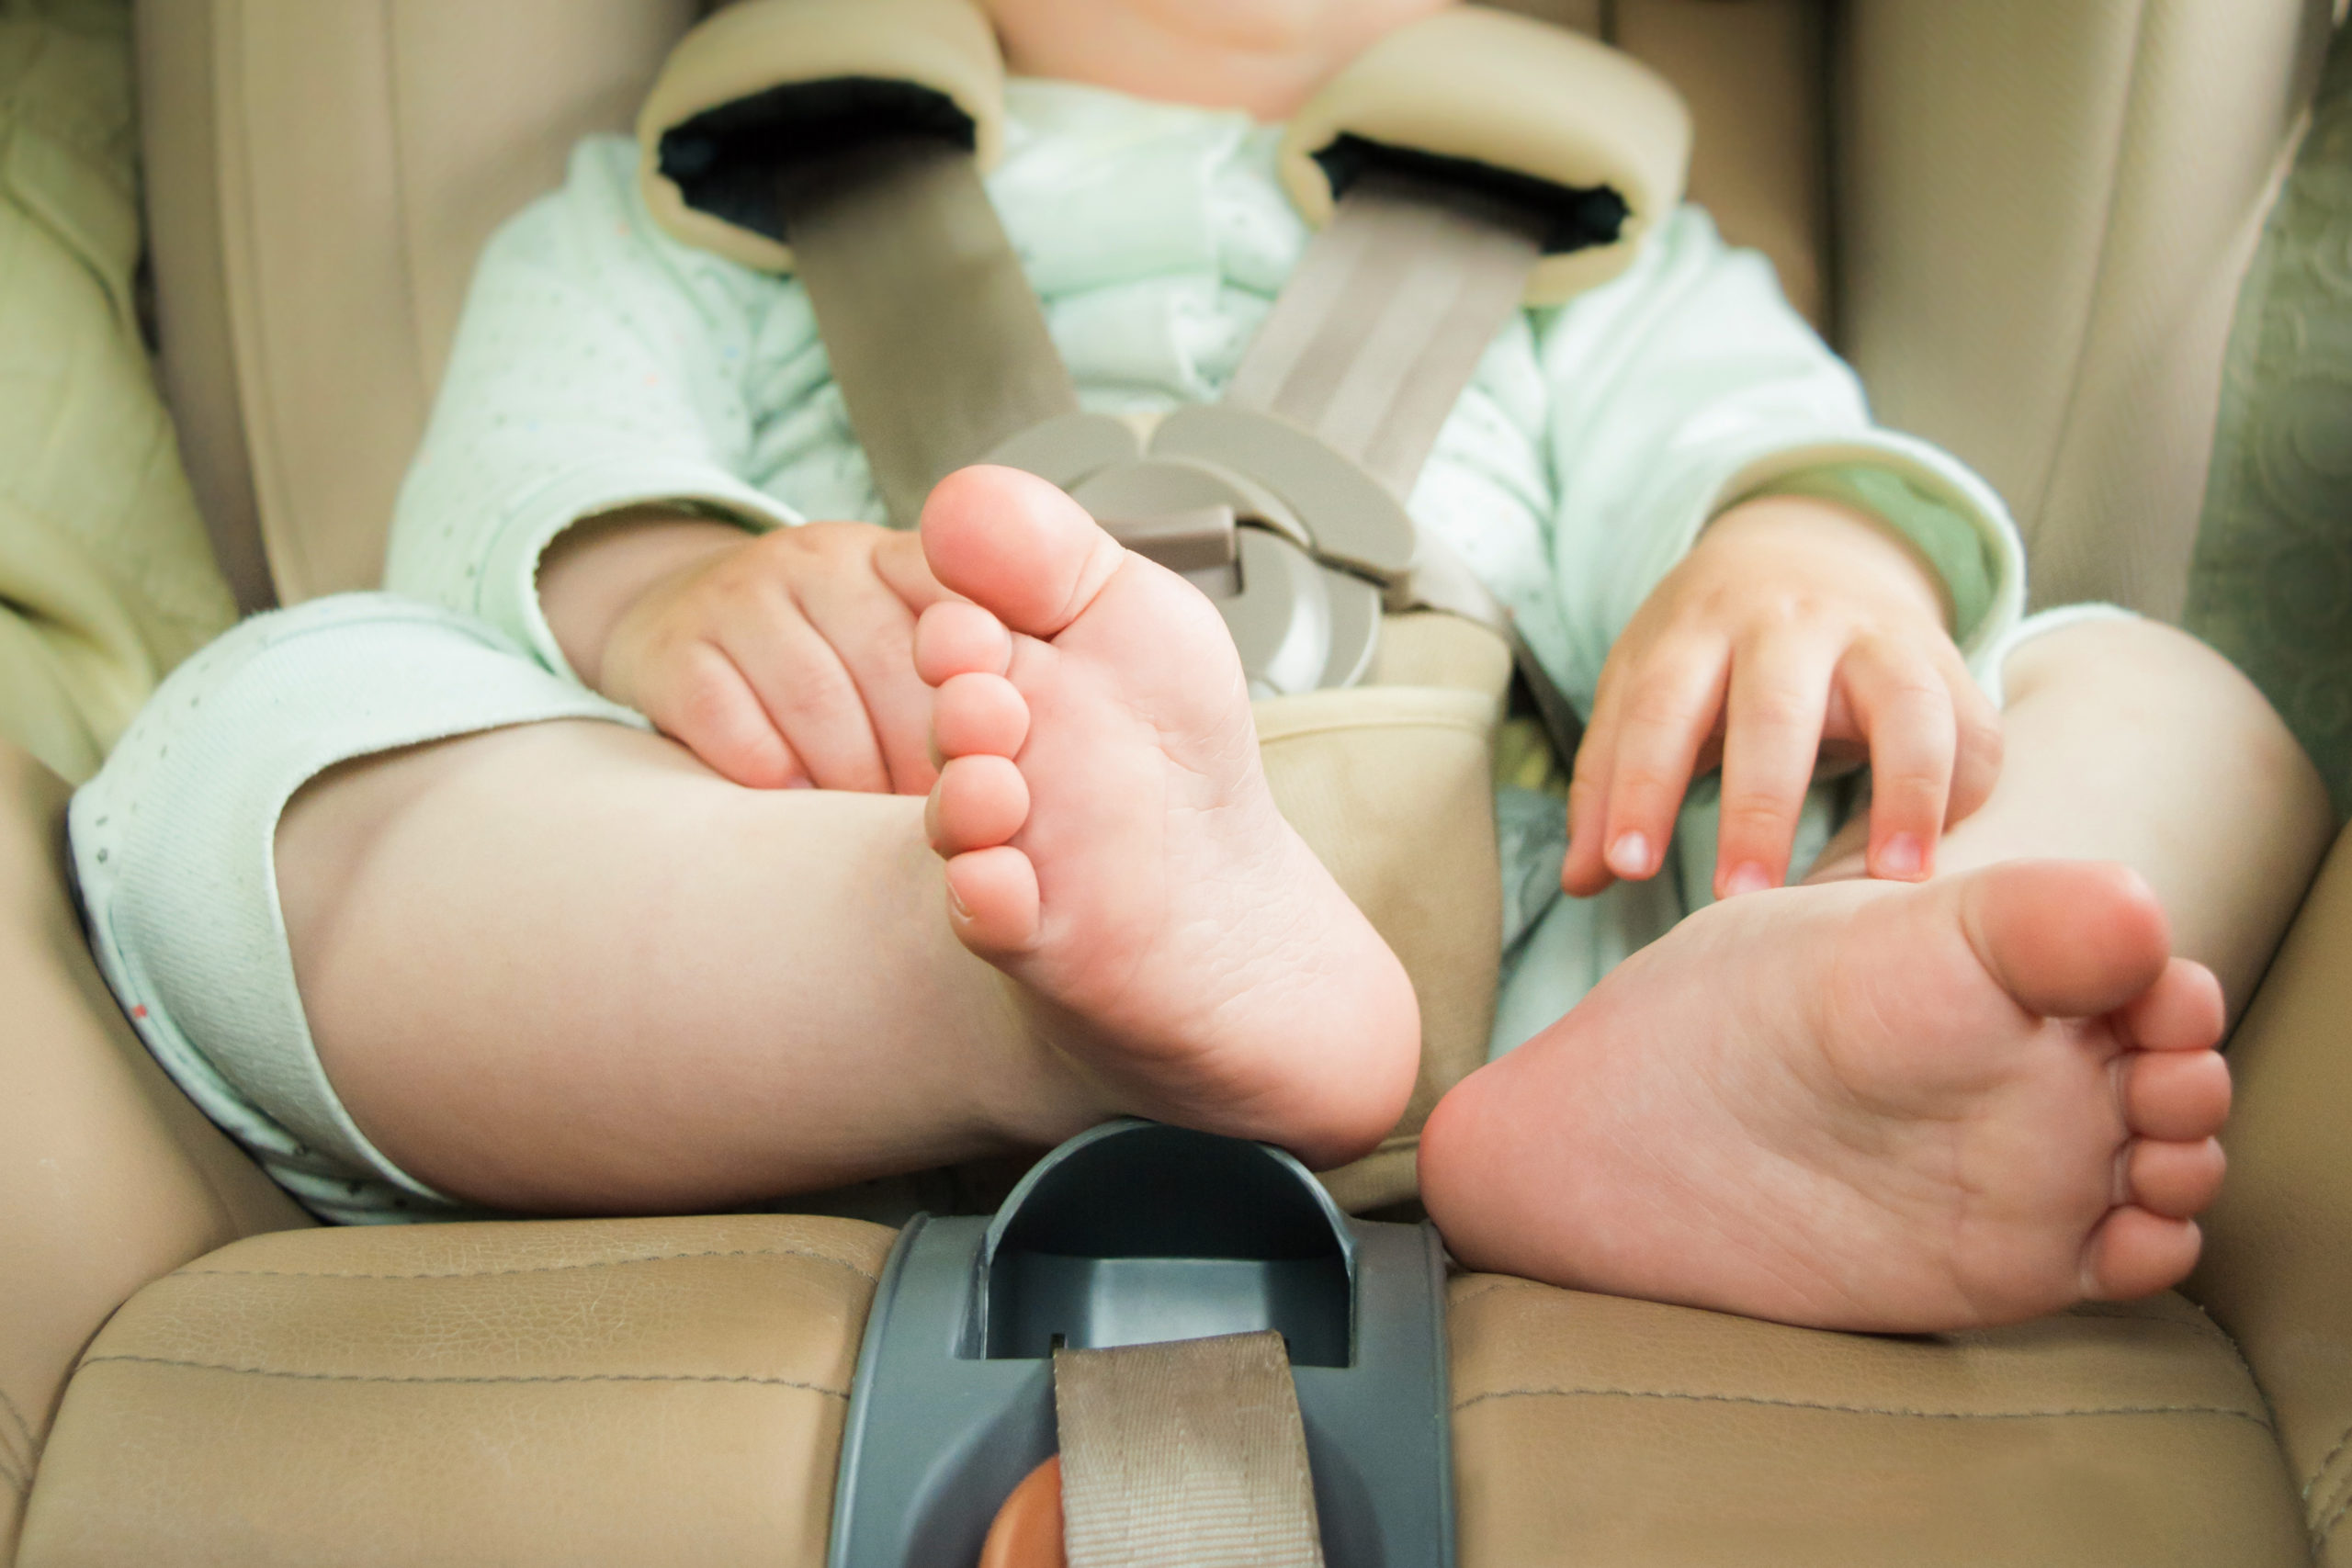 Car stolen with Baby strapped inside Carseat; found safe by Surrey RCMP